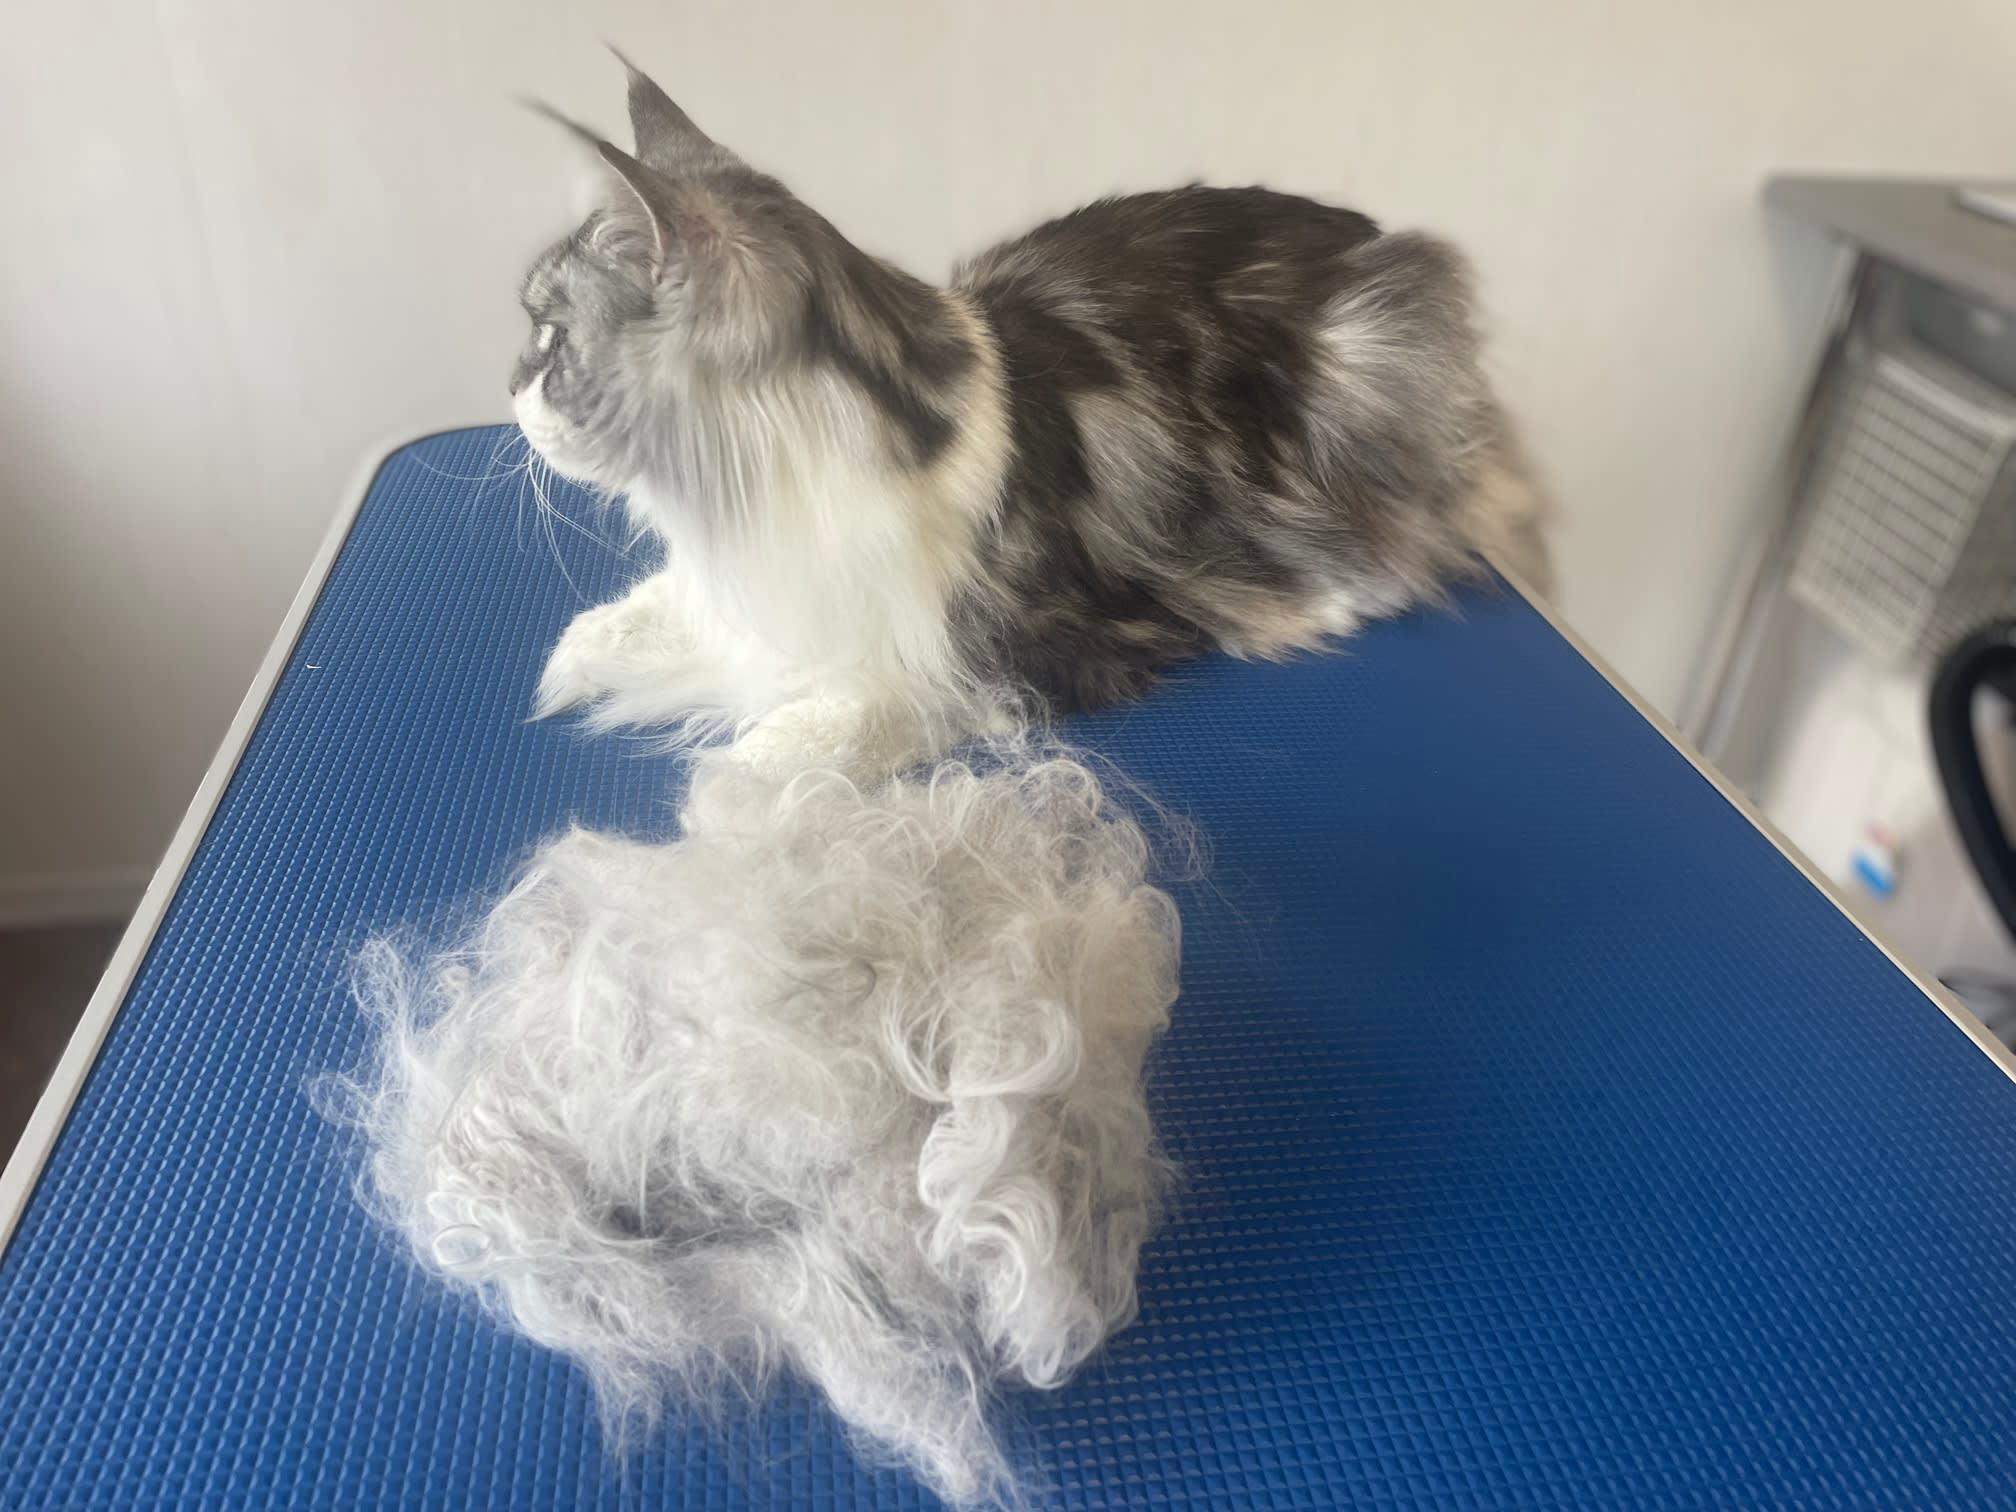 Images Cloverlea Cattery & Cat Grooming Salon